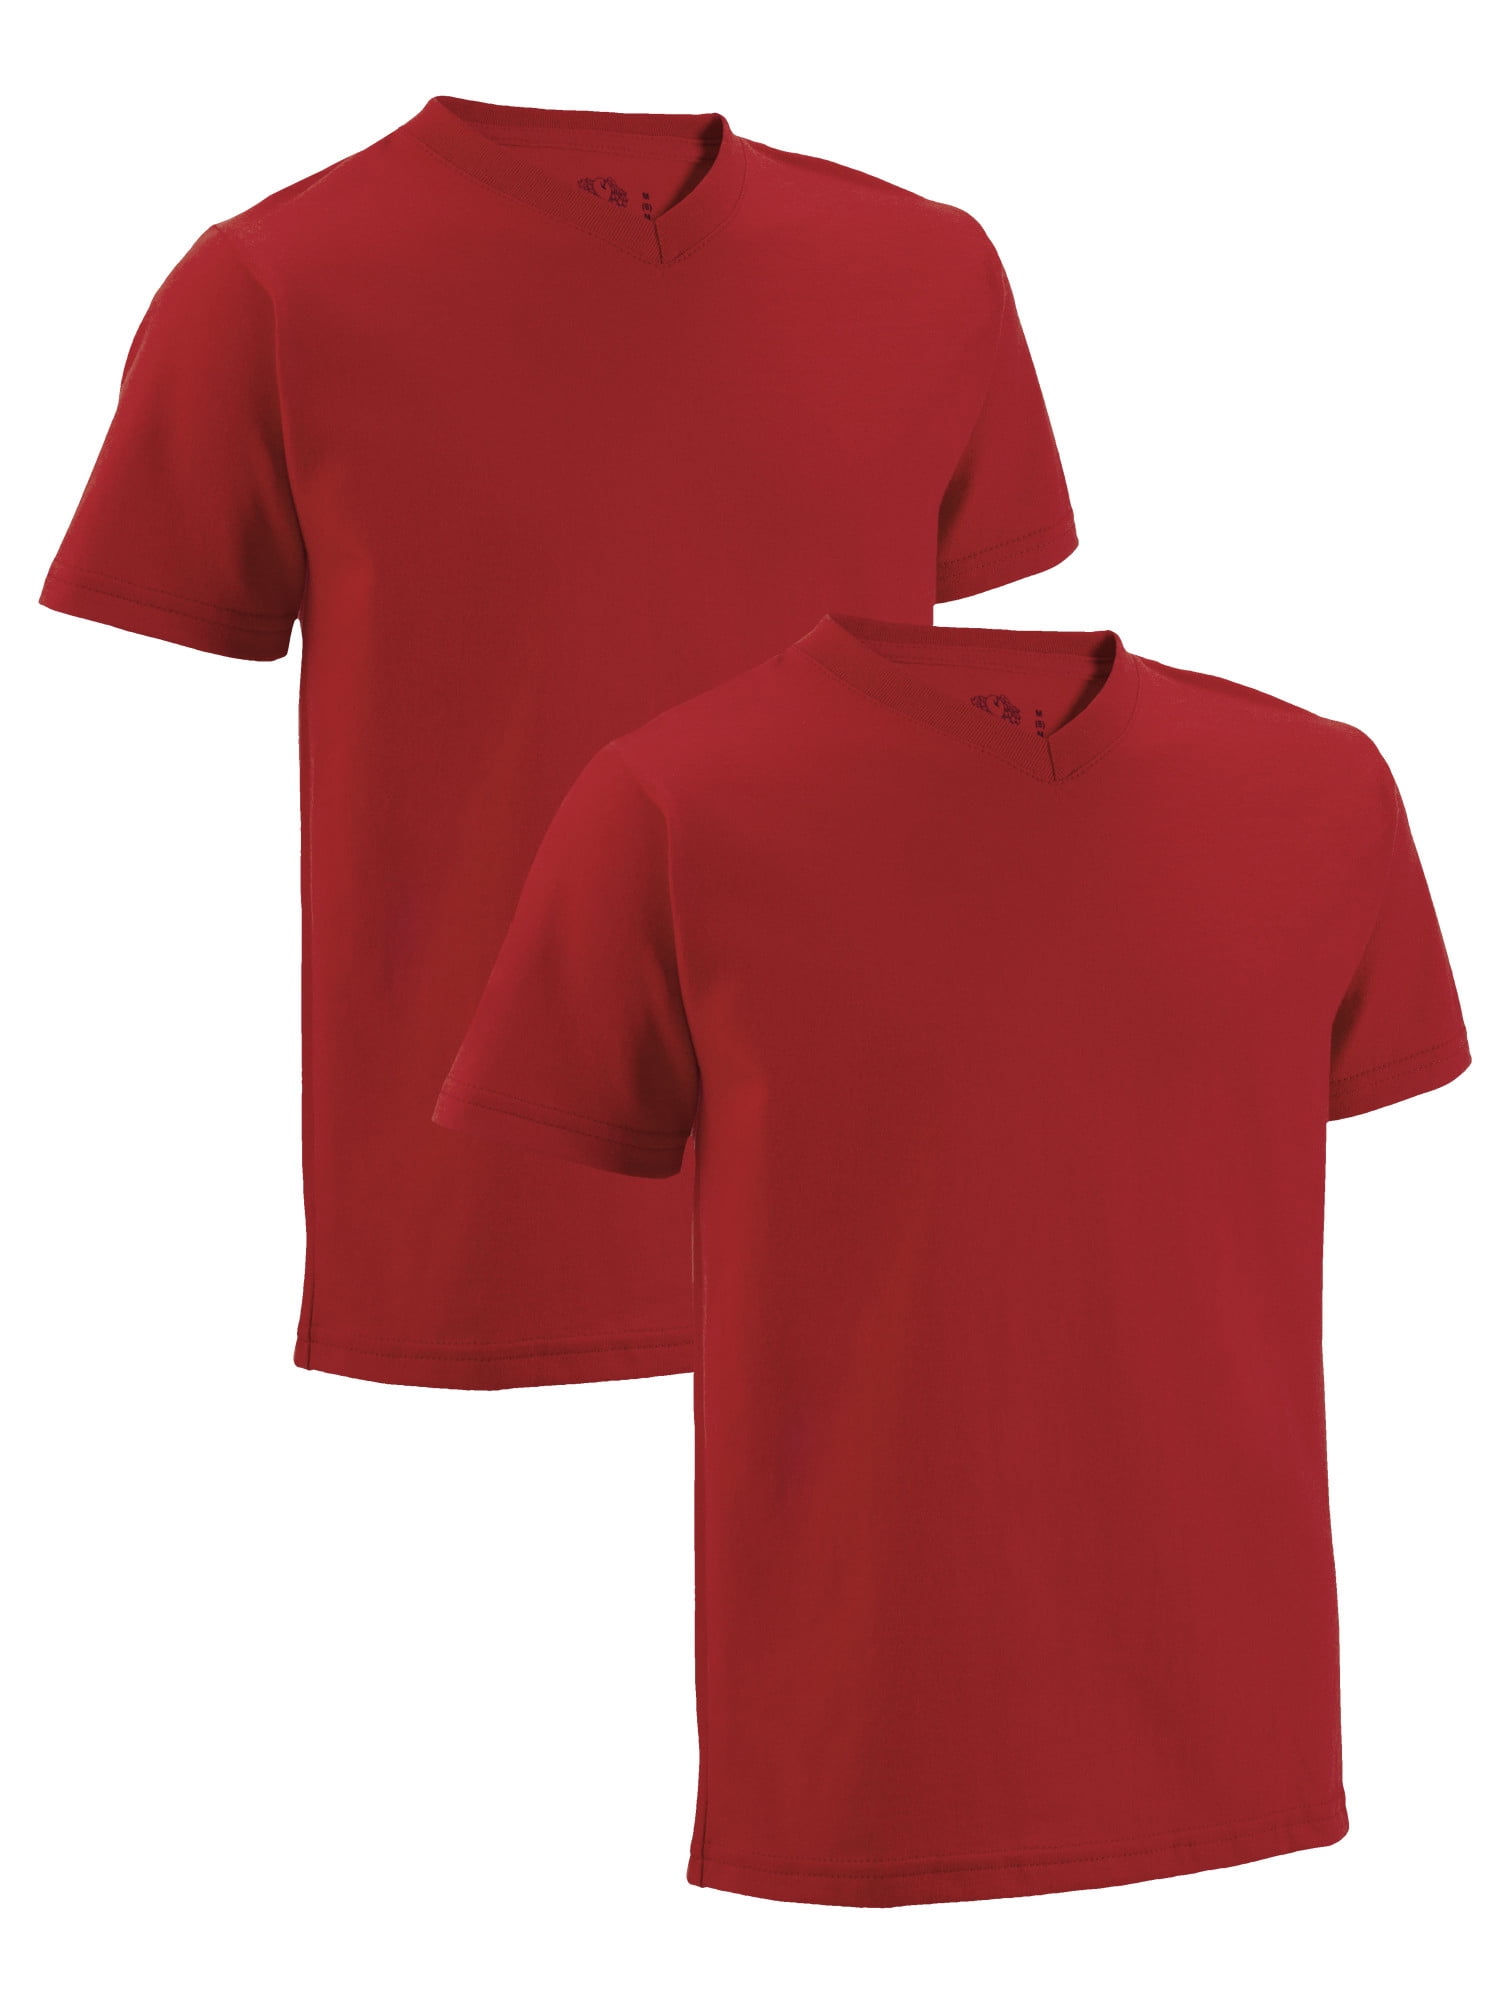 Fruit of the loom t shirts for boys plus size